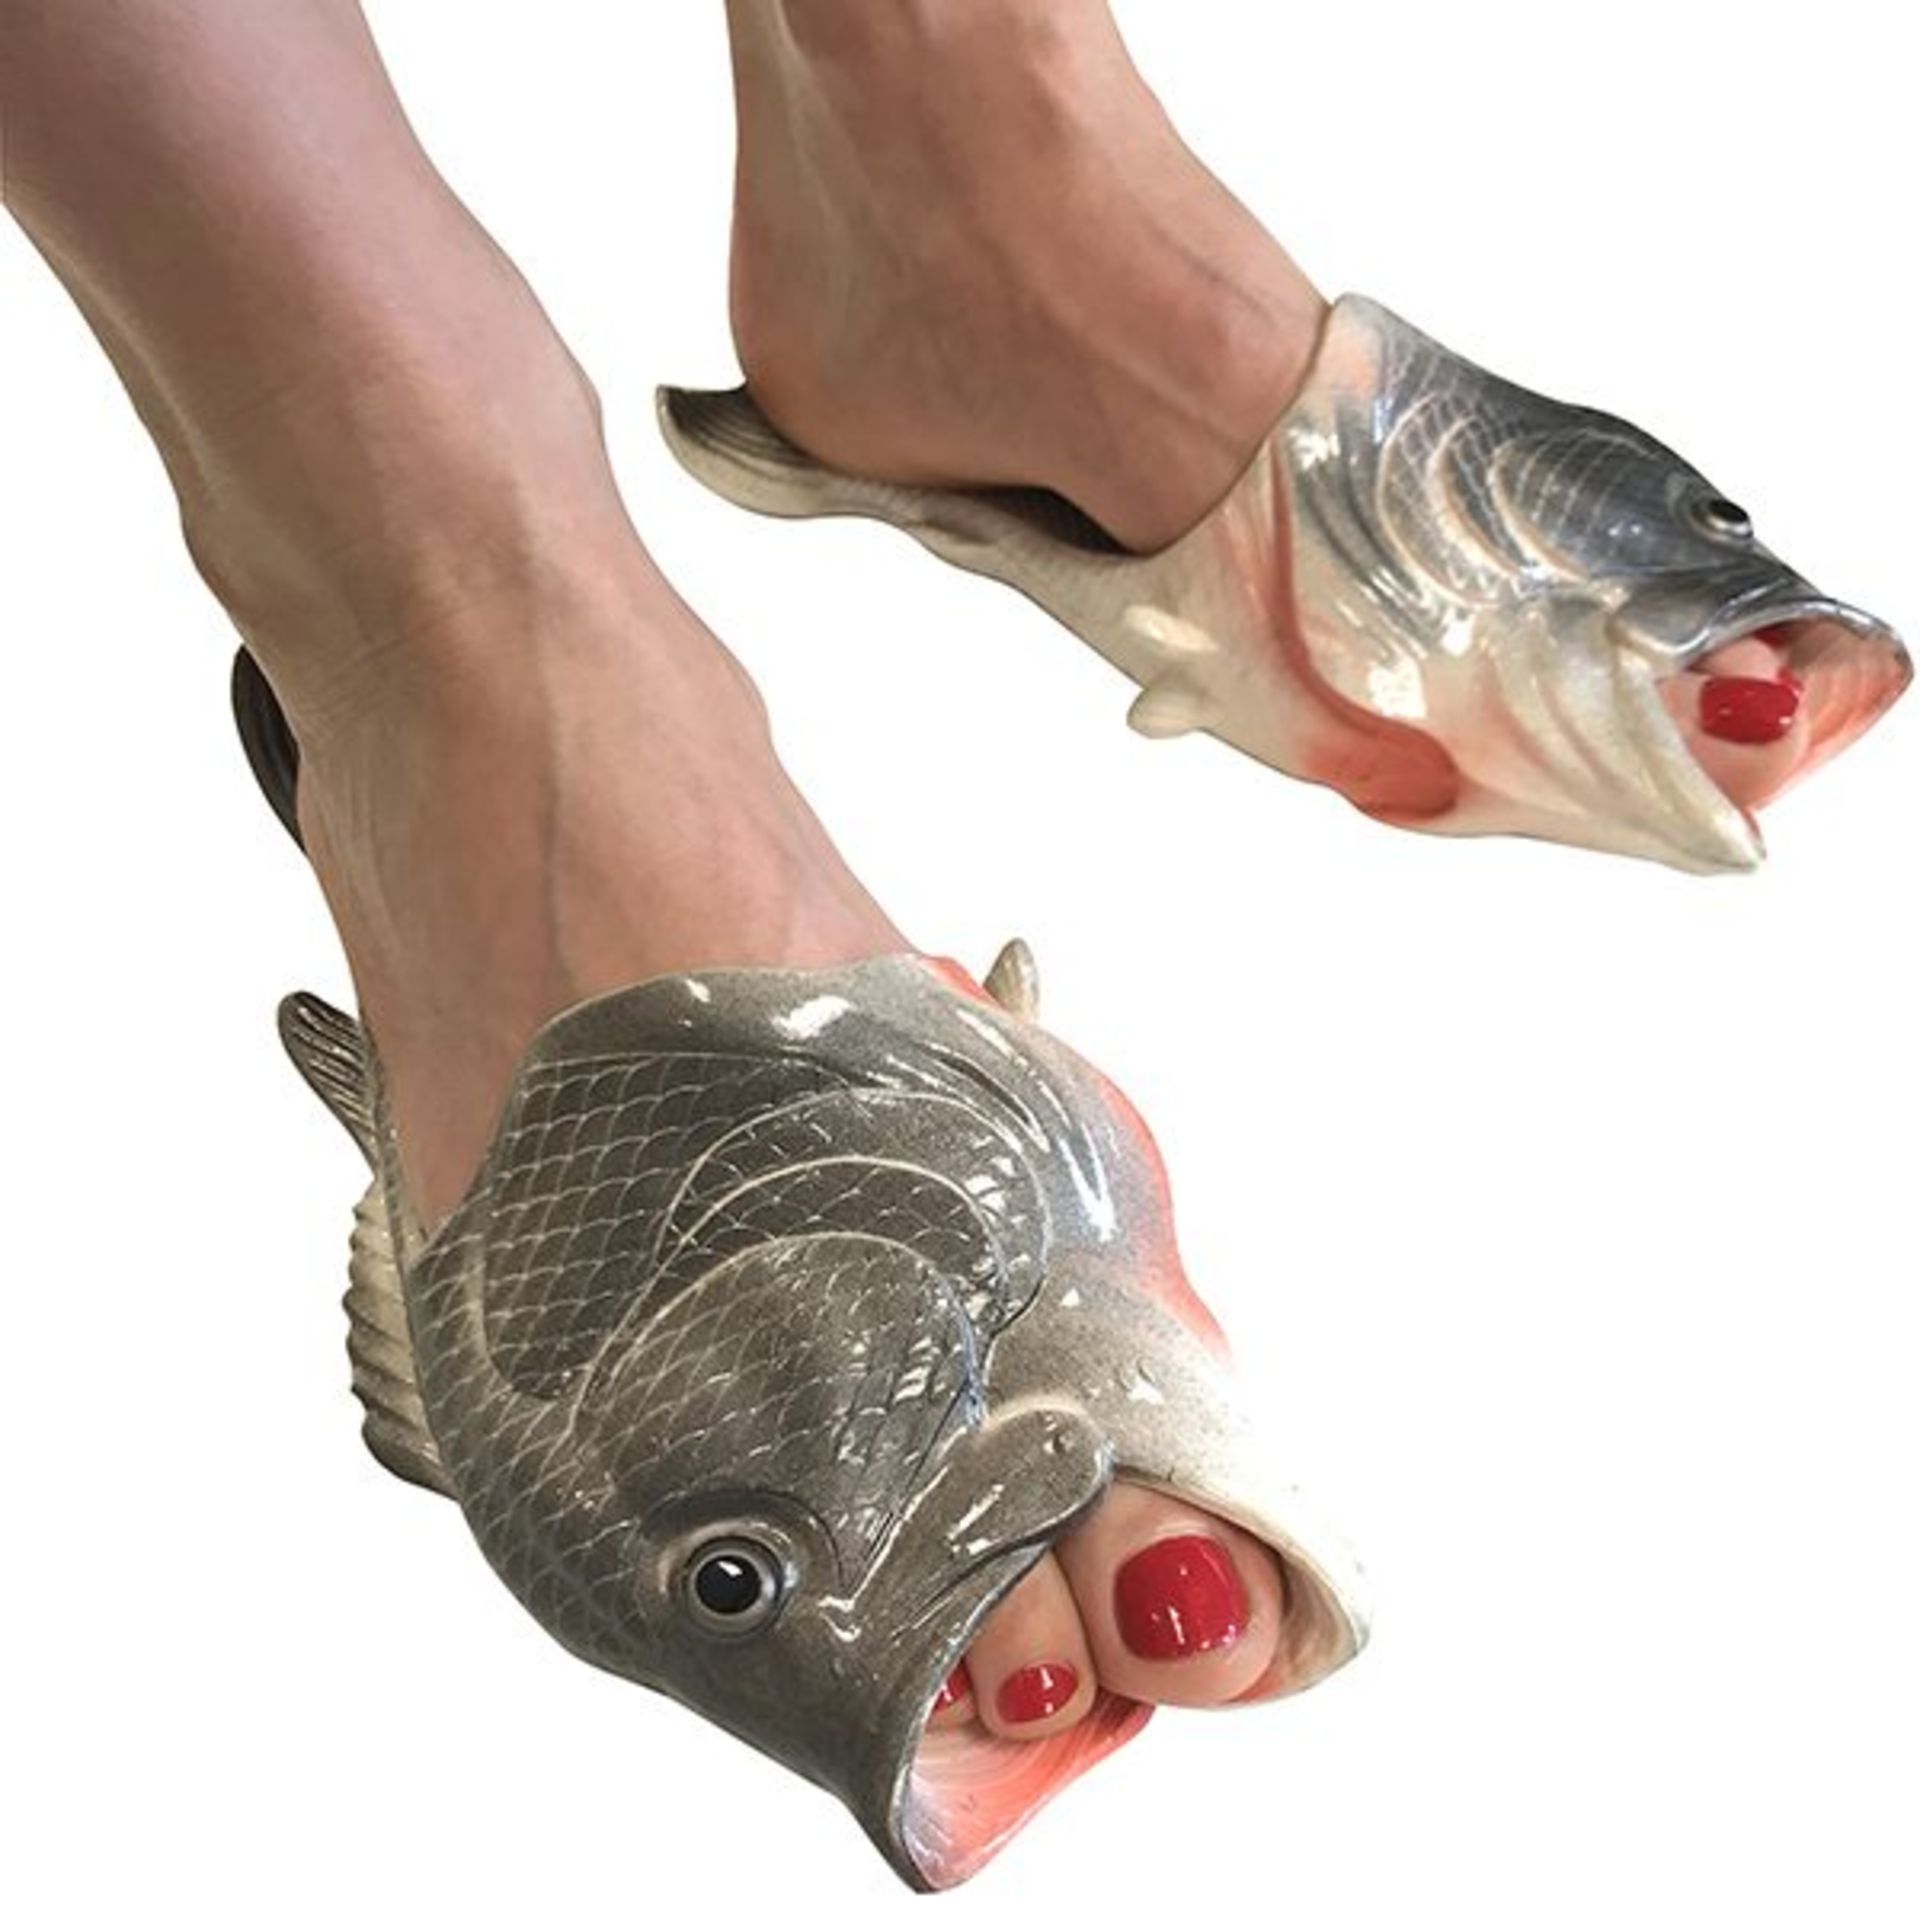 (10B) 10x Fishy Sandals Pair (Mixed Size). All Units Appear As New.